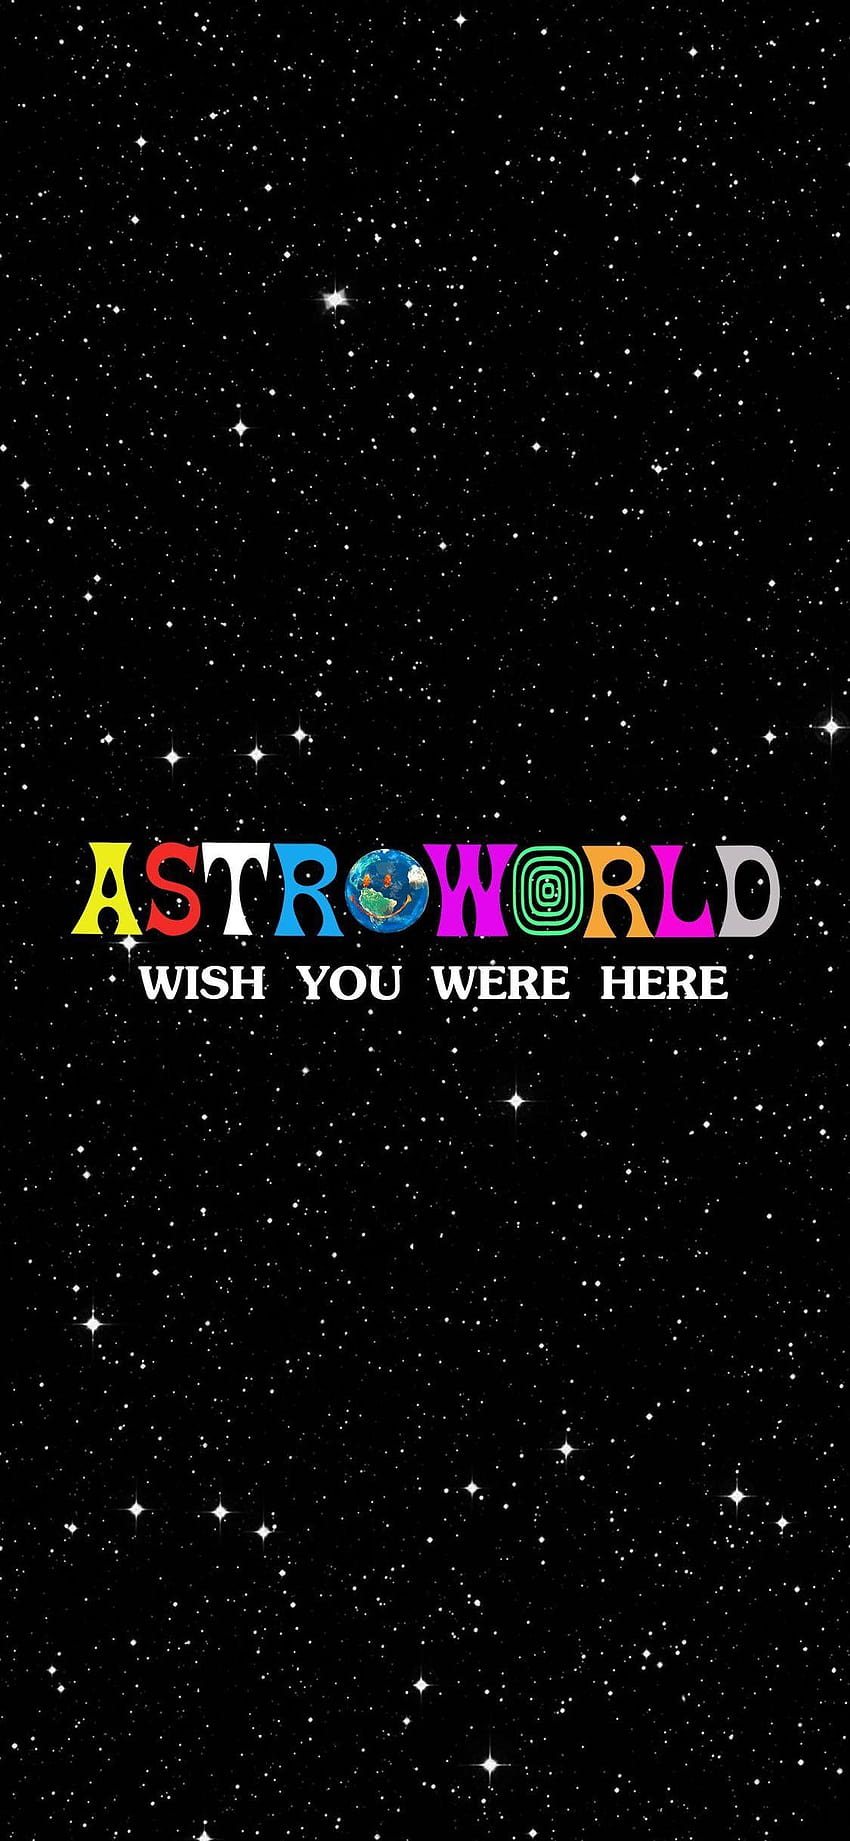 Travis Scott. La Flame. ASTROWORLD. Wish You Were Here, wish you were here android HD phone wallpaper